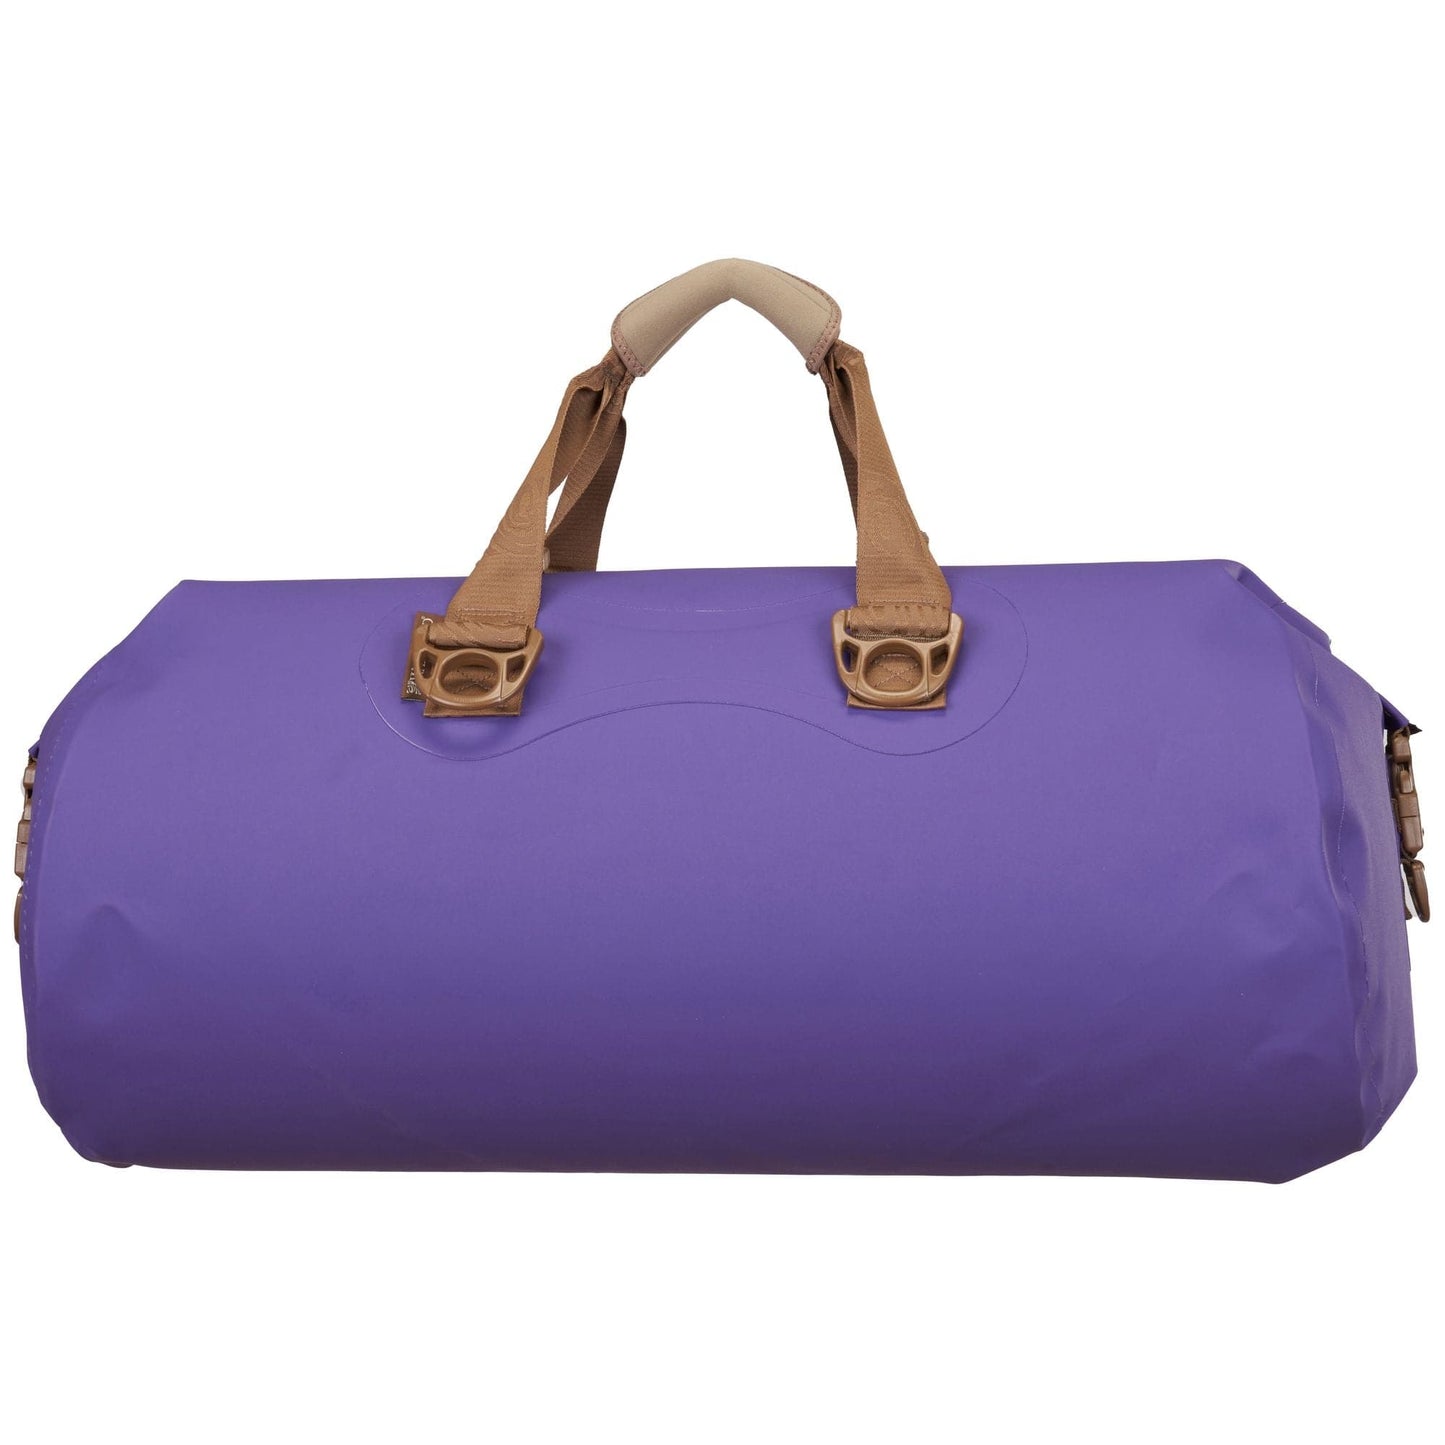 Featuring the Yukon Duffel dry bag manufactured by Watershed shown here from a fifth angle.